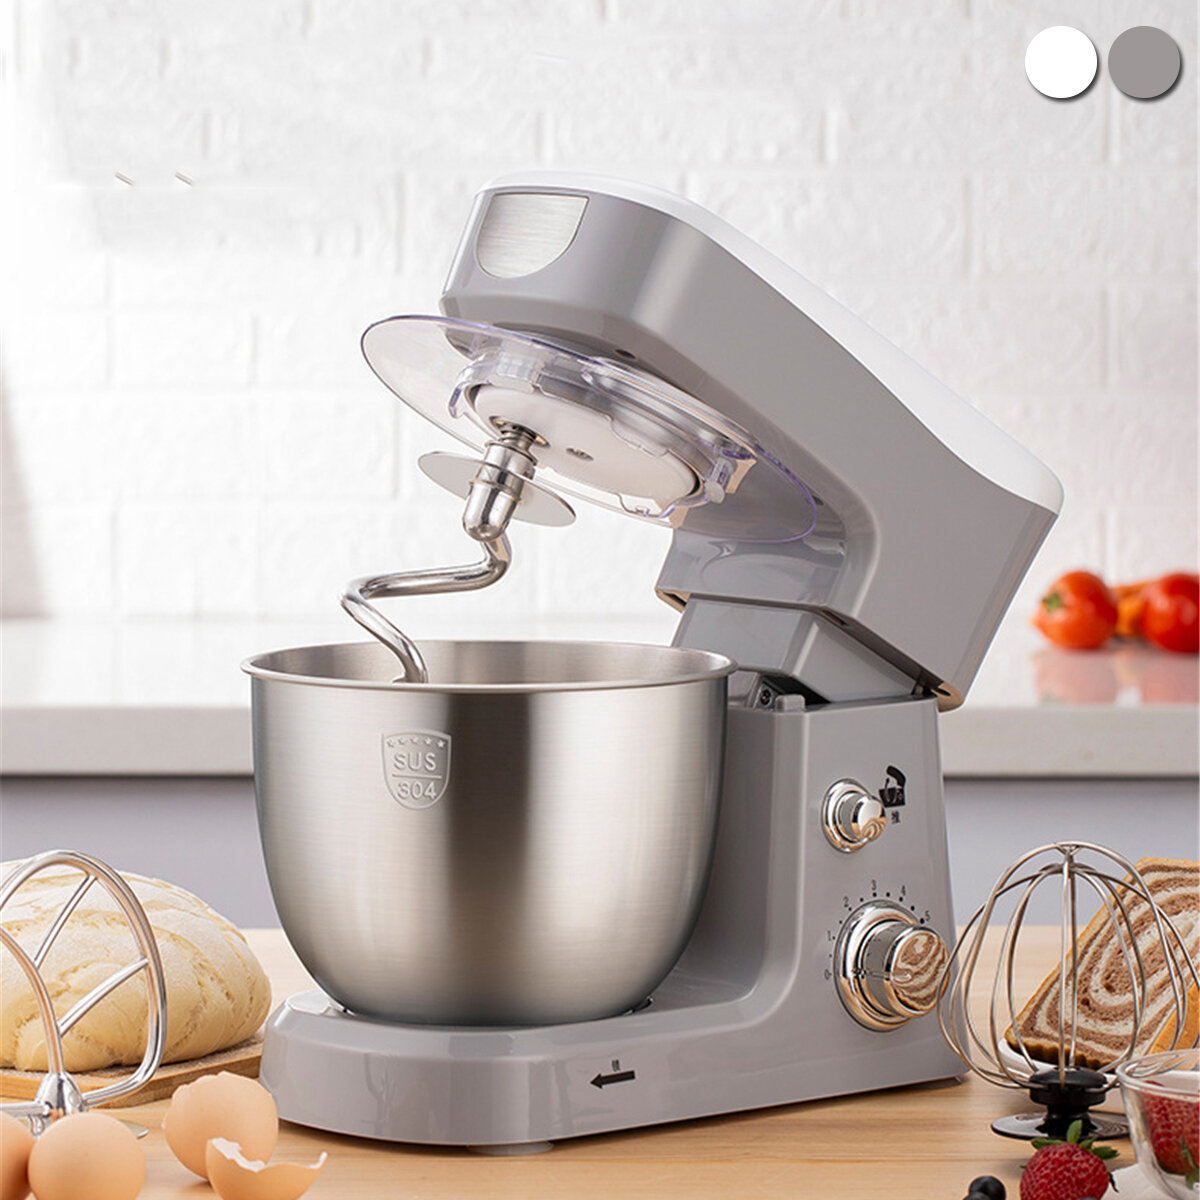 

Haoteng WLS-5513 Electric Food Stand Mixer 600W Tilt-Head 6 Speed Stainless Steel Bowl for Knead Dough Egg-beater